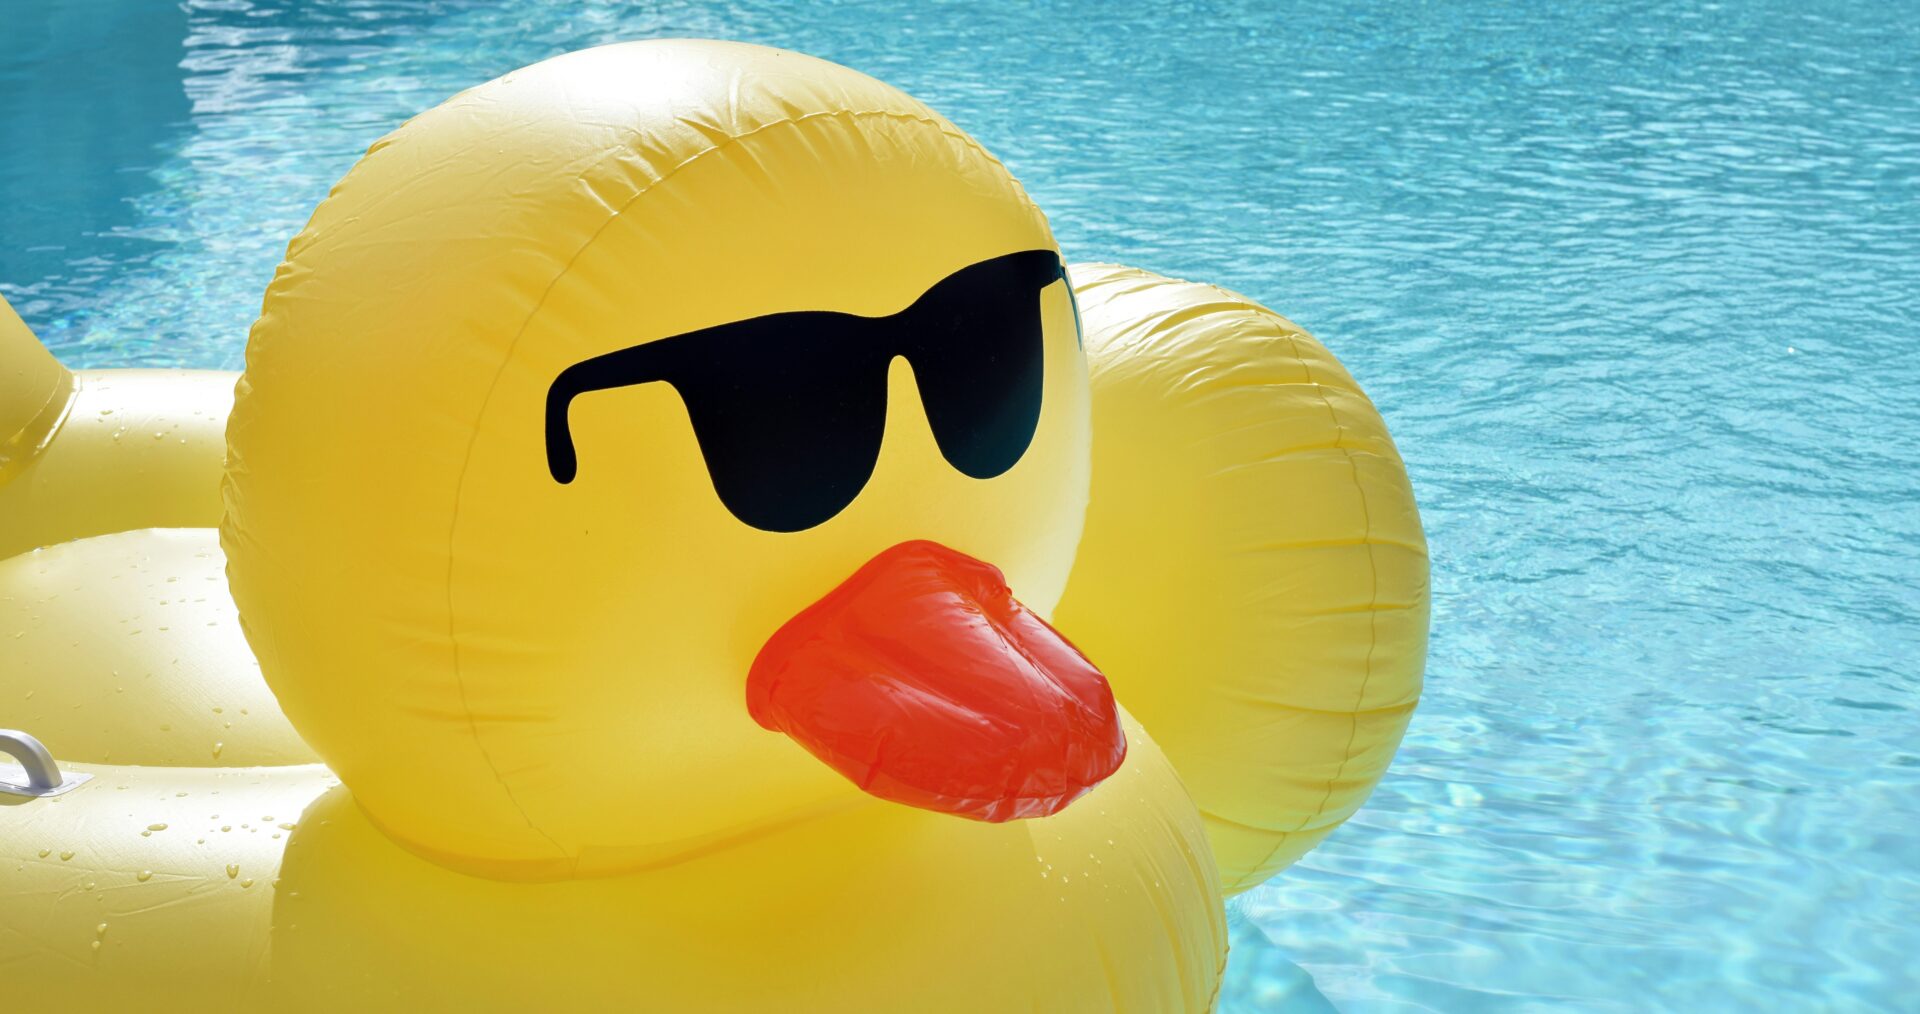 A large inflatable, yellow duck wearing sunglasses floats alone on a large blue swimming pool